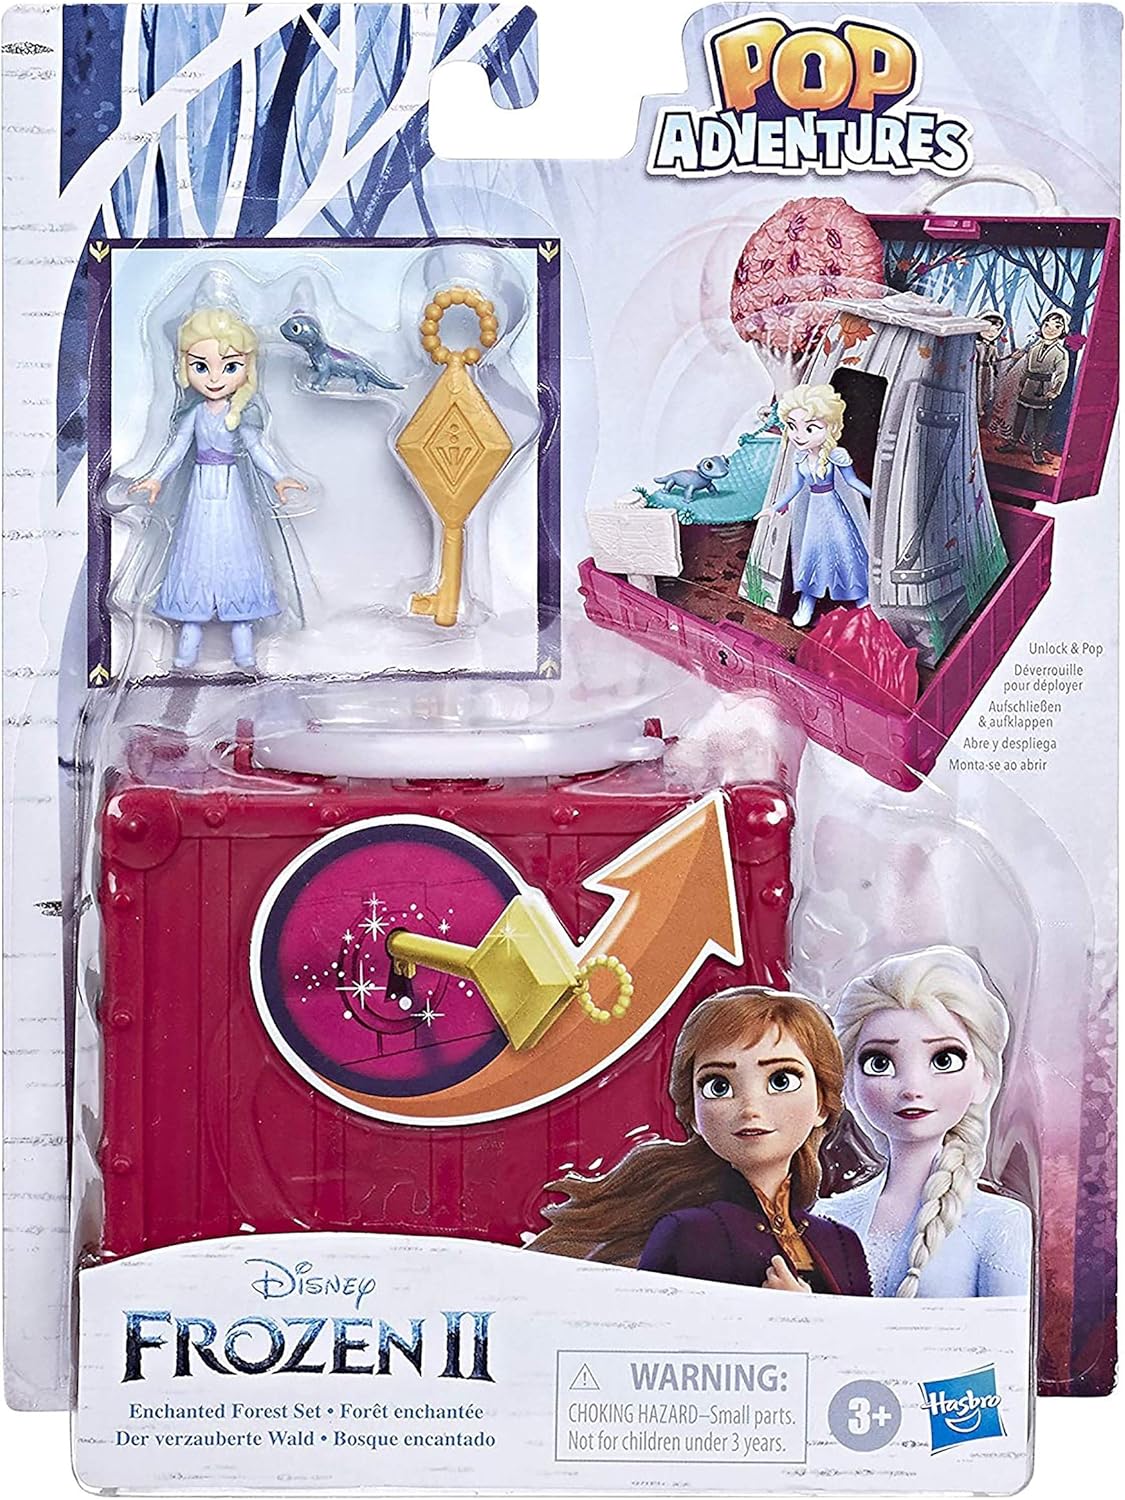 Disney Frozen Hasbro Pop Adventures Enchanted Forest Set Pop-Up Playset with Handle,Including Elsa Doll,Toy Inspired 2 Movie